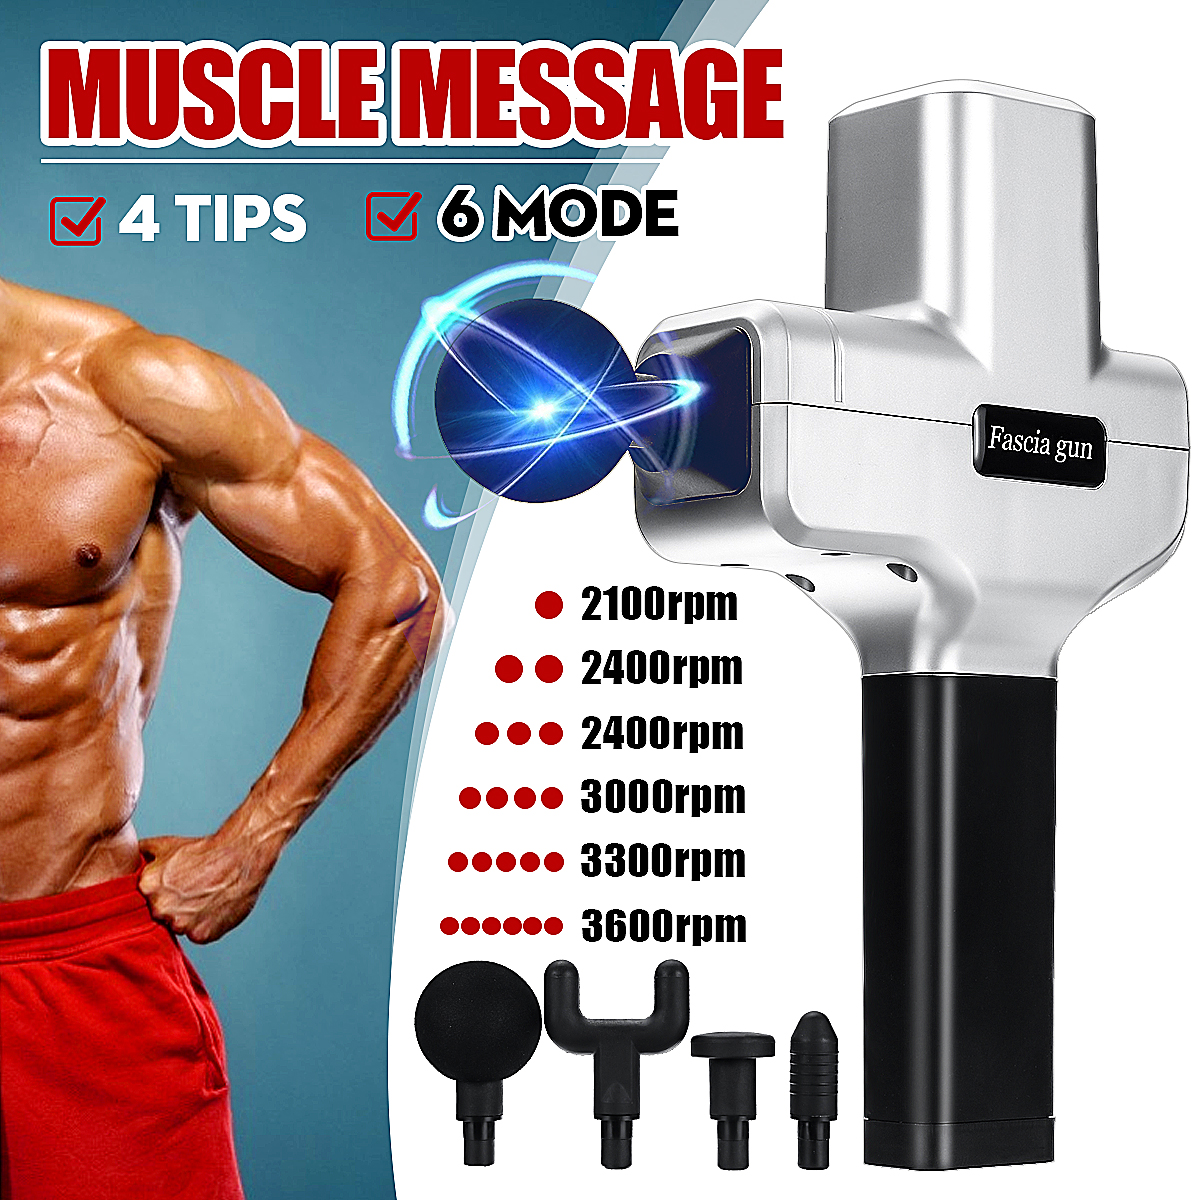 2400RMM-Rechargeable-Professional-Electric-Percussion-Massager-6-Modes-Muscle-Vibration-Massager-Exe-1616160-1